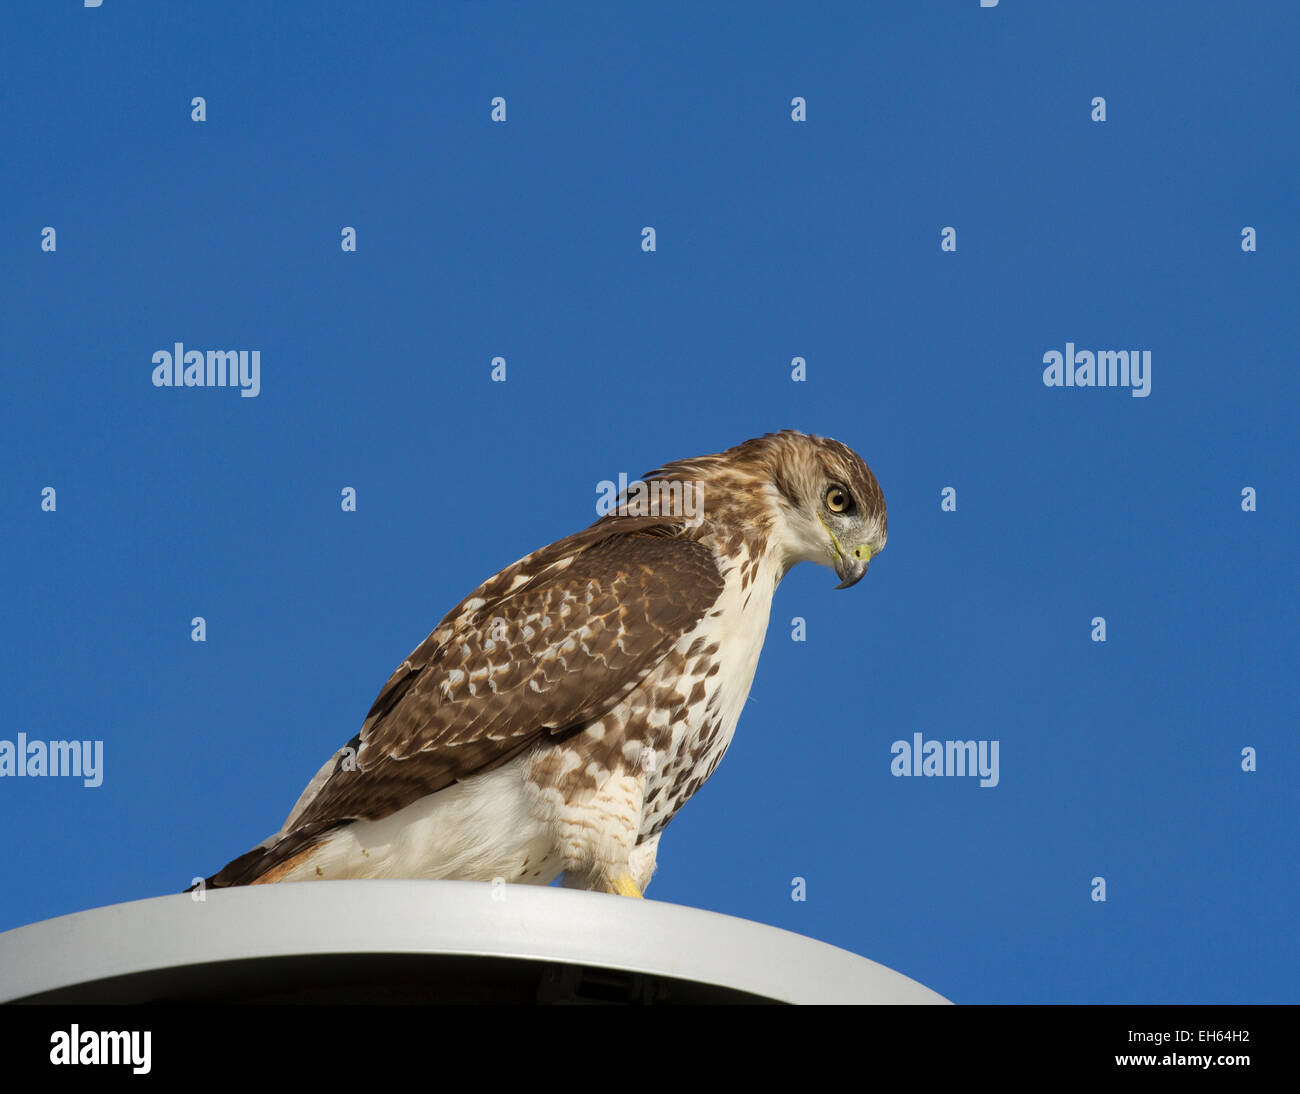 A red tail hawk resting on a light stand Stock Photo